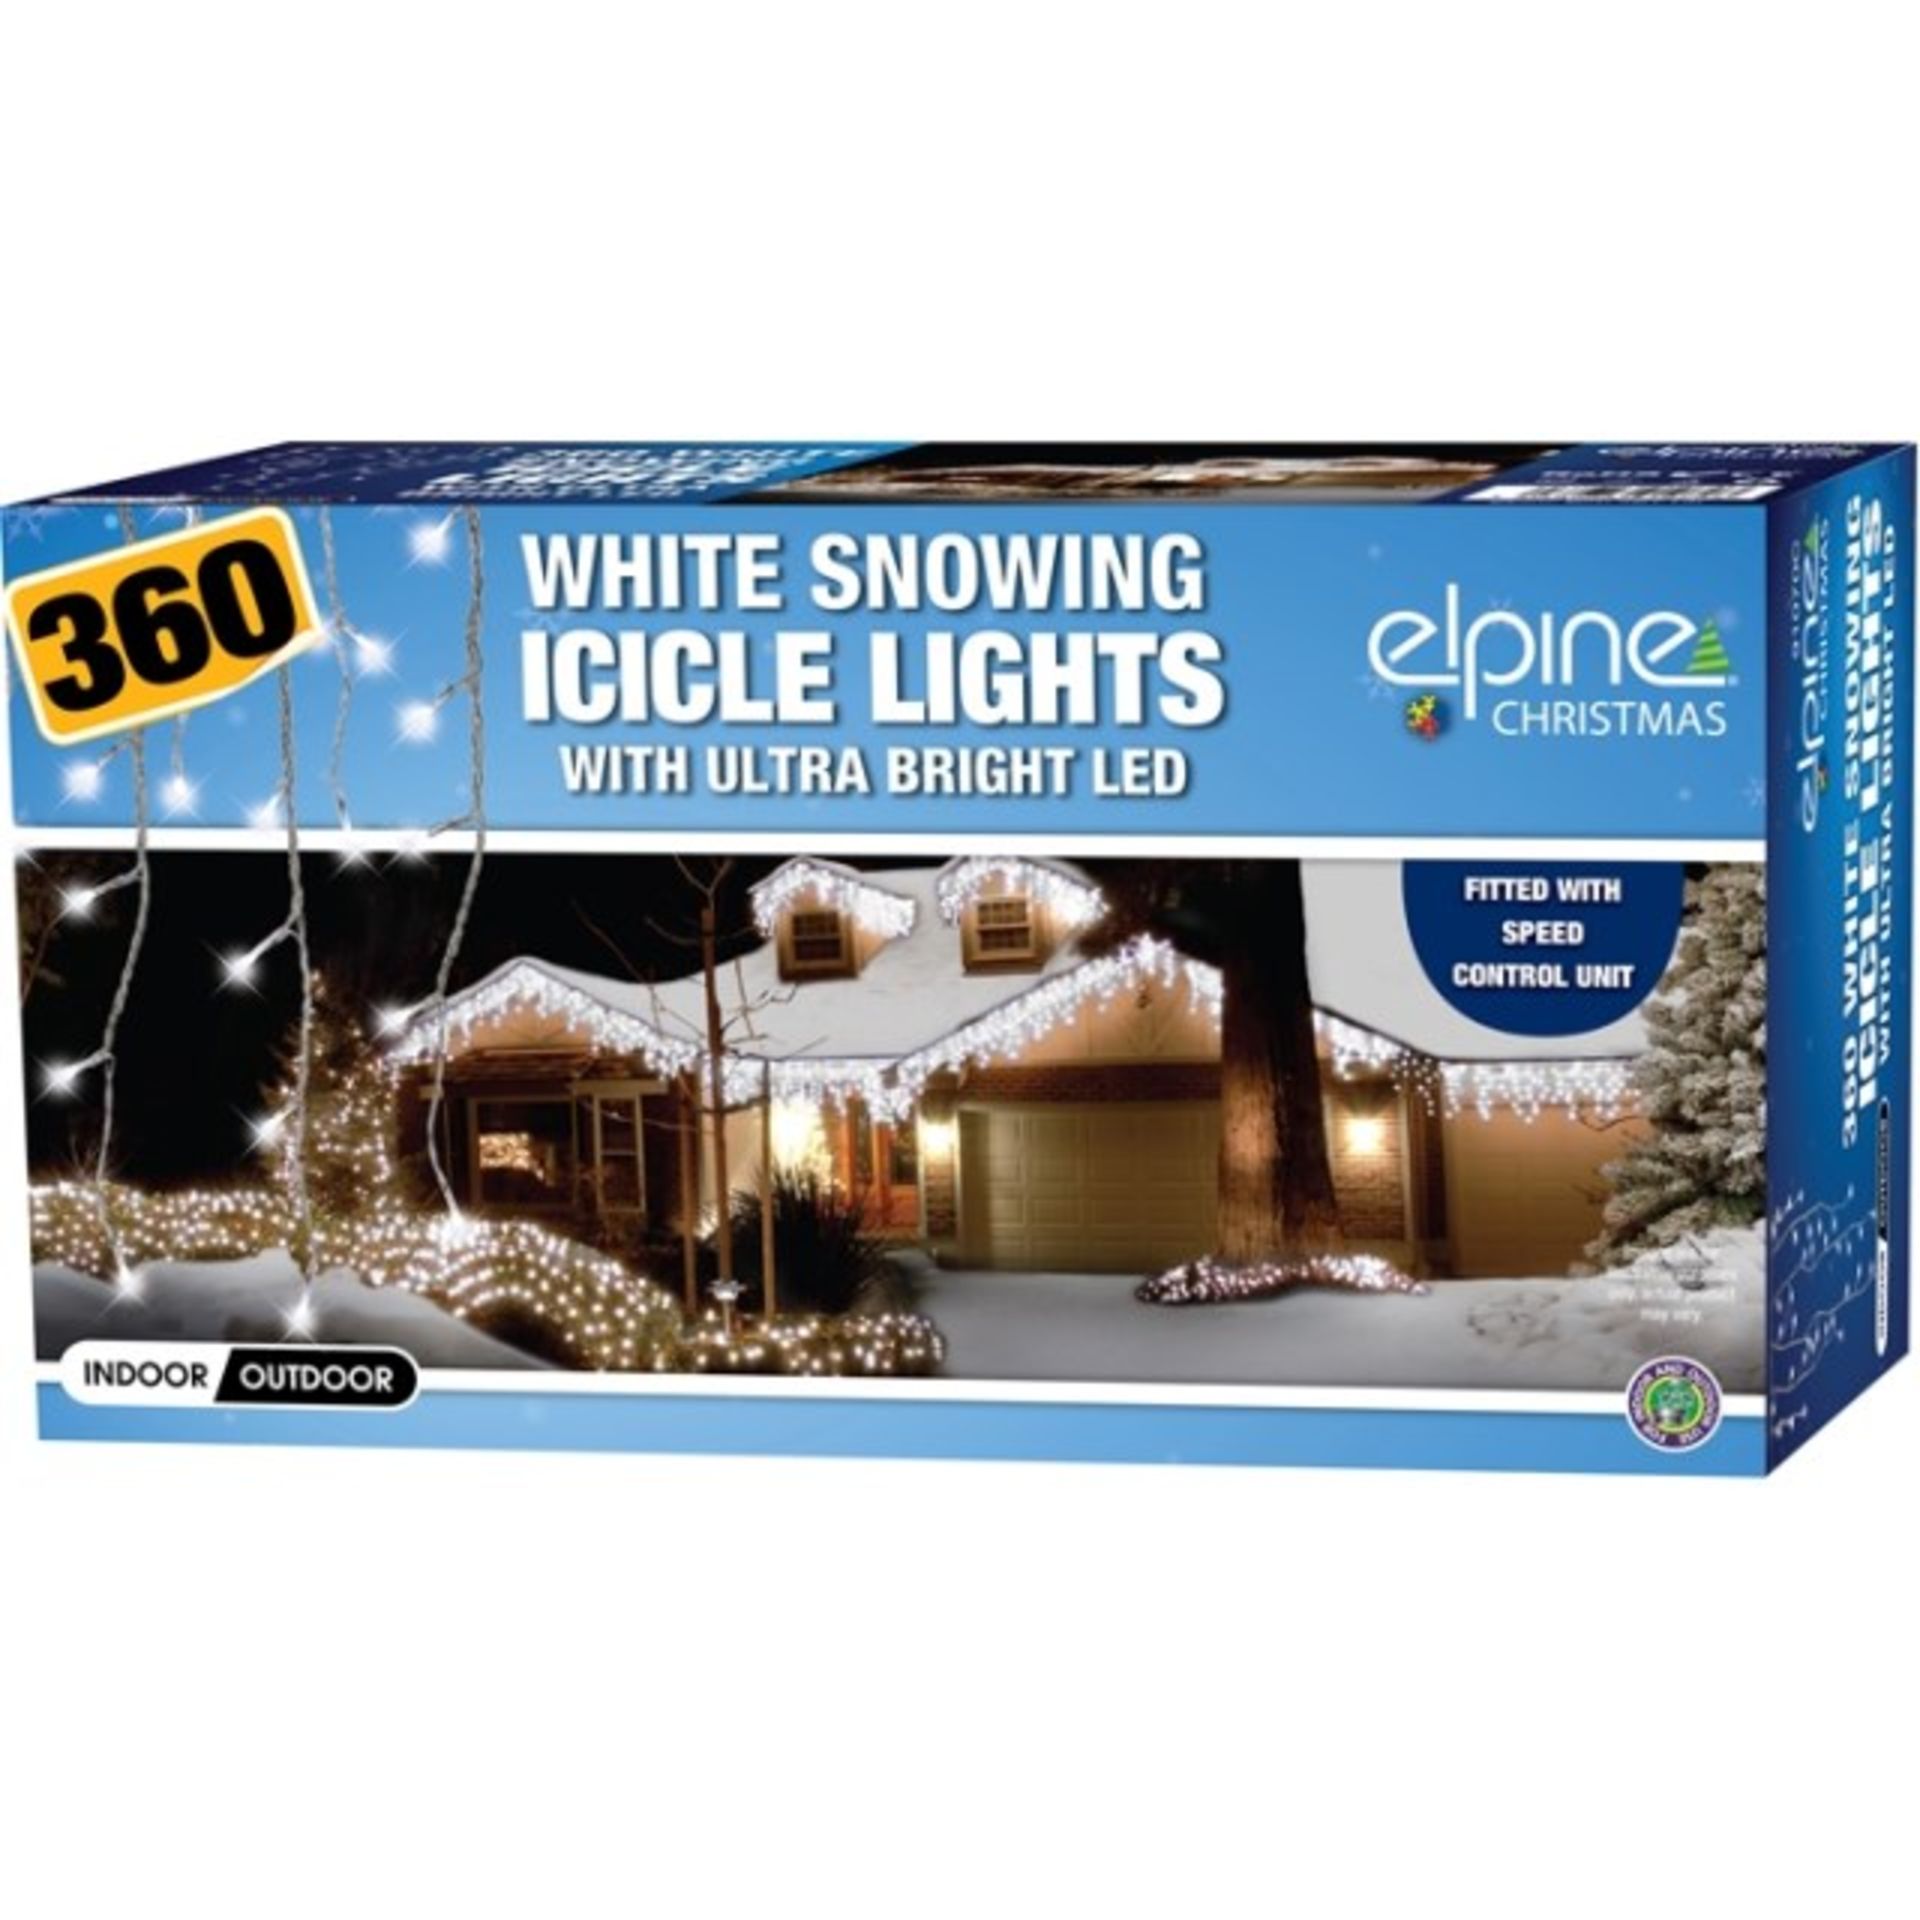 V Brand New Set of 360 Snowing LED Icicle Light - White Ultra bright with speed control RRP £49